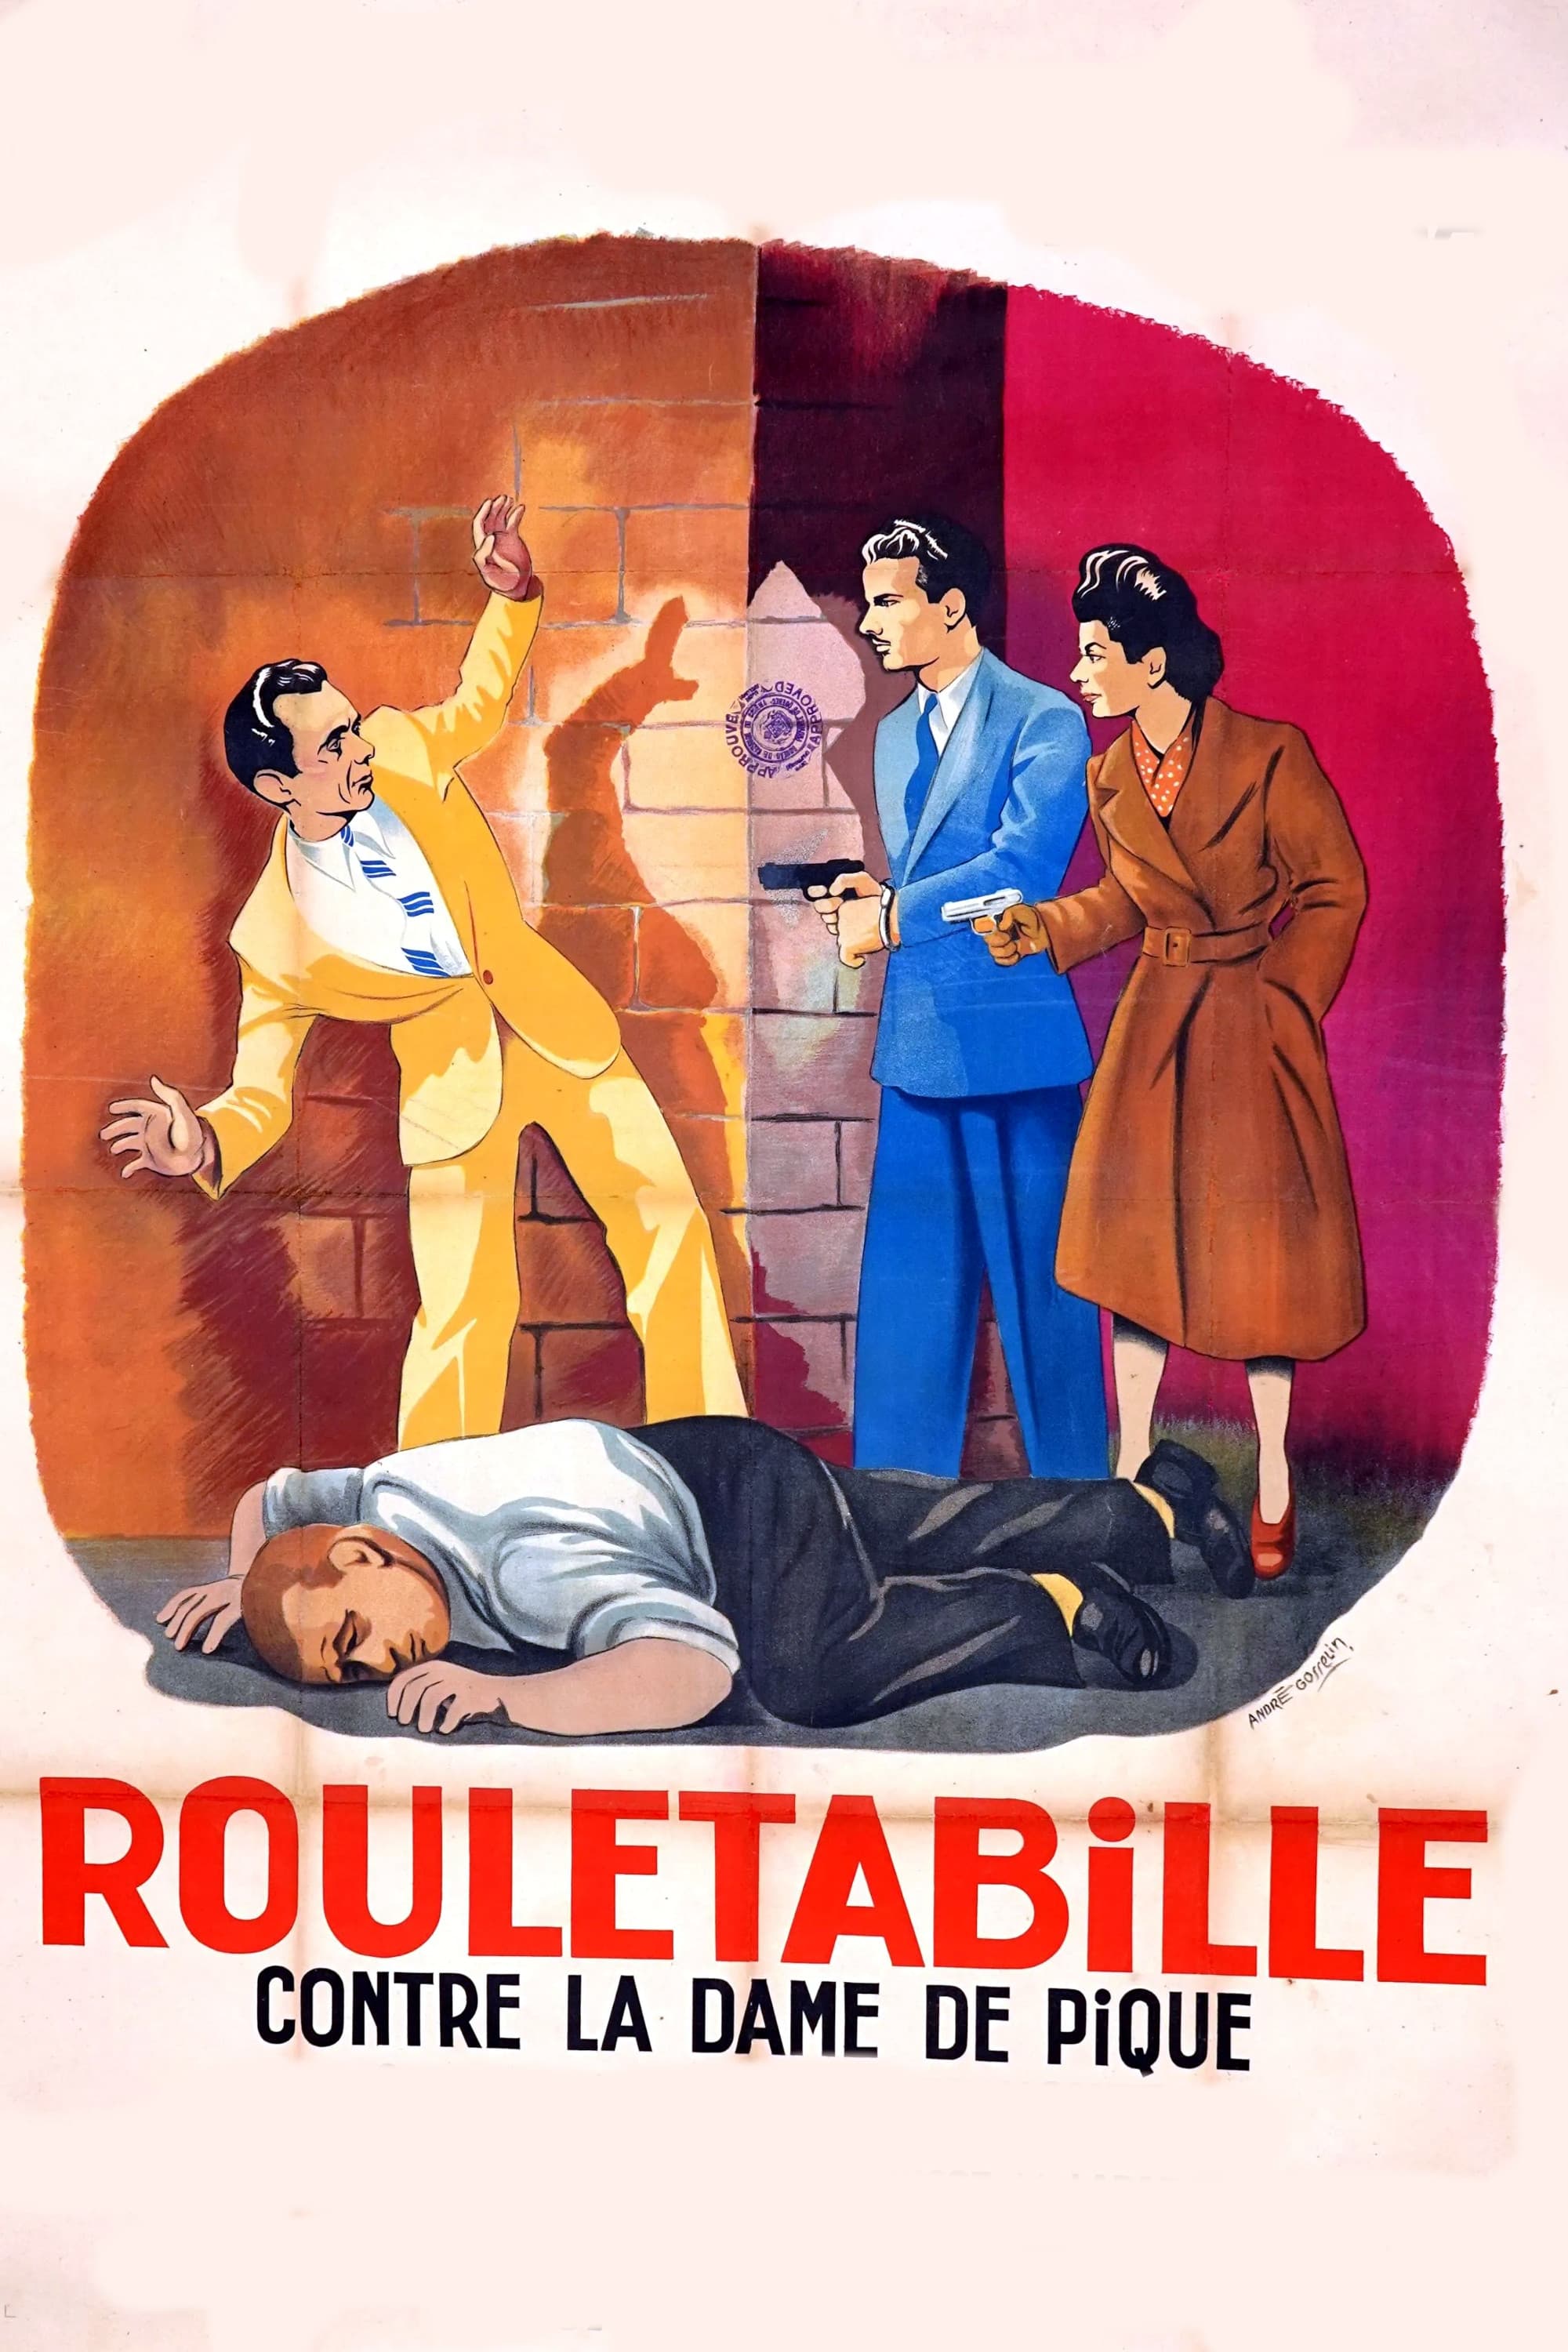 Rouletabille Against the Queen of Spades